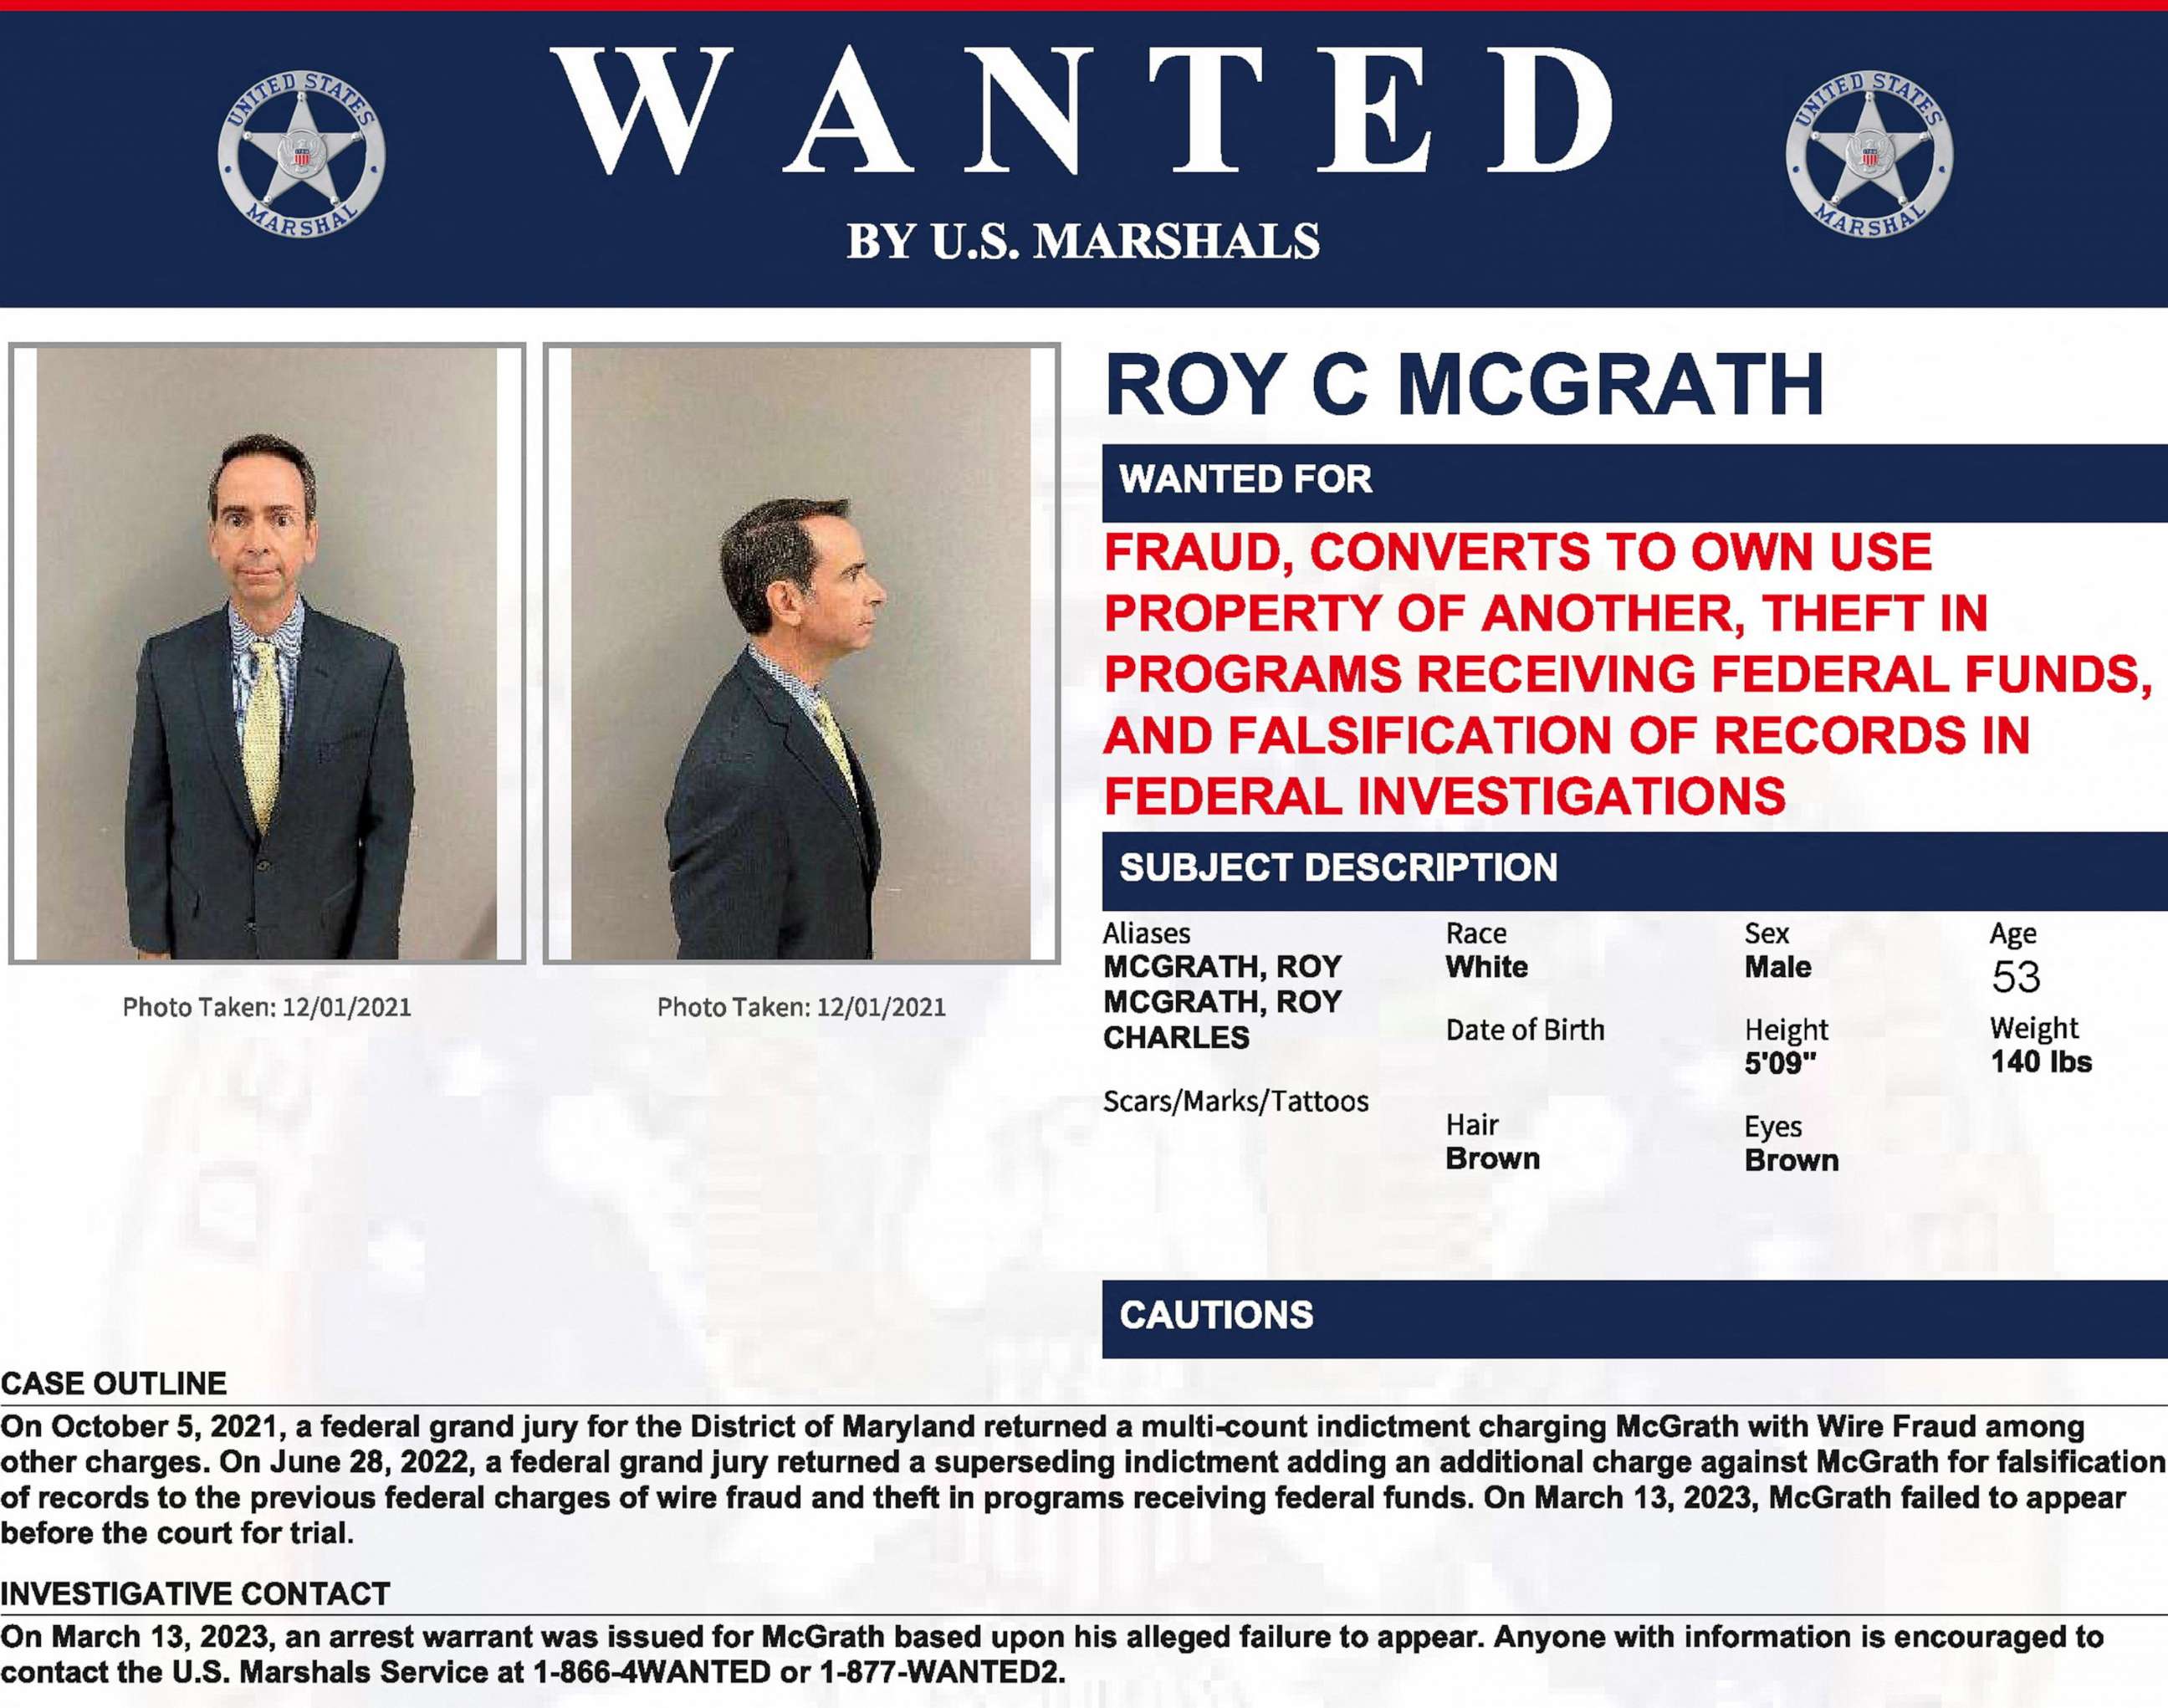 PHOTO: Roy McGrath, the former top aide to an ex Maryland Governor, is seen in this U.S. Marshals Service wanted poster released on March 14, 2023 after McGrath failed to appear in court where he is charged with wire fraud and falsification.